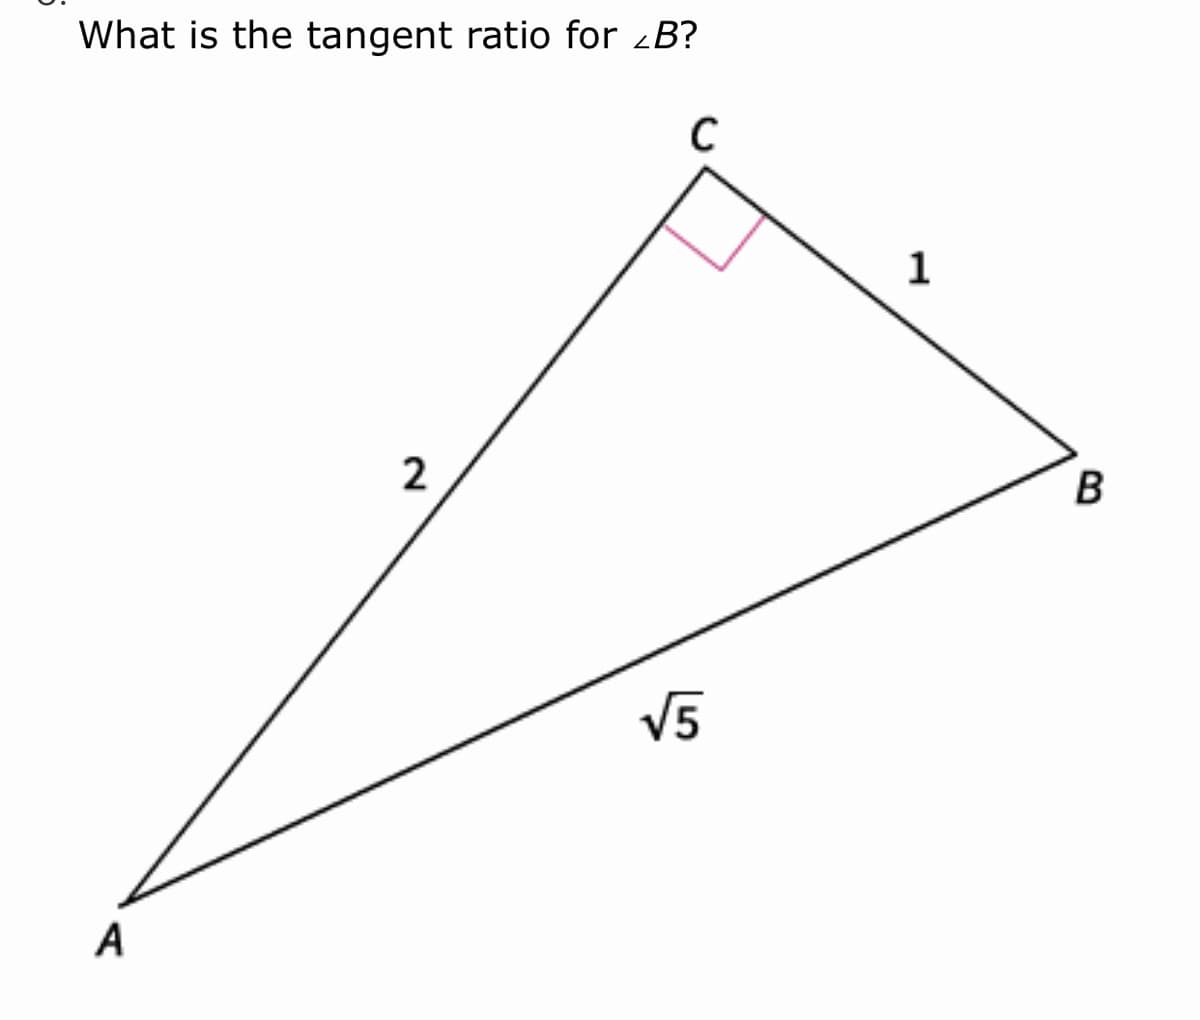 What is the tangent ratio for zB?
1
B
V5
A
